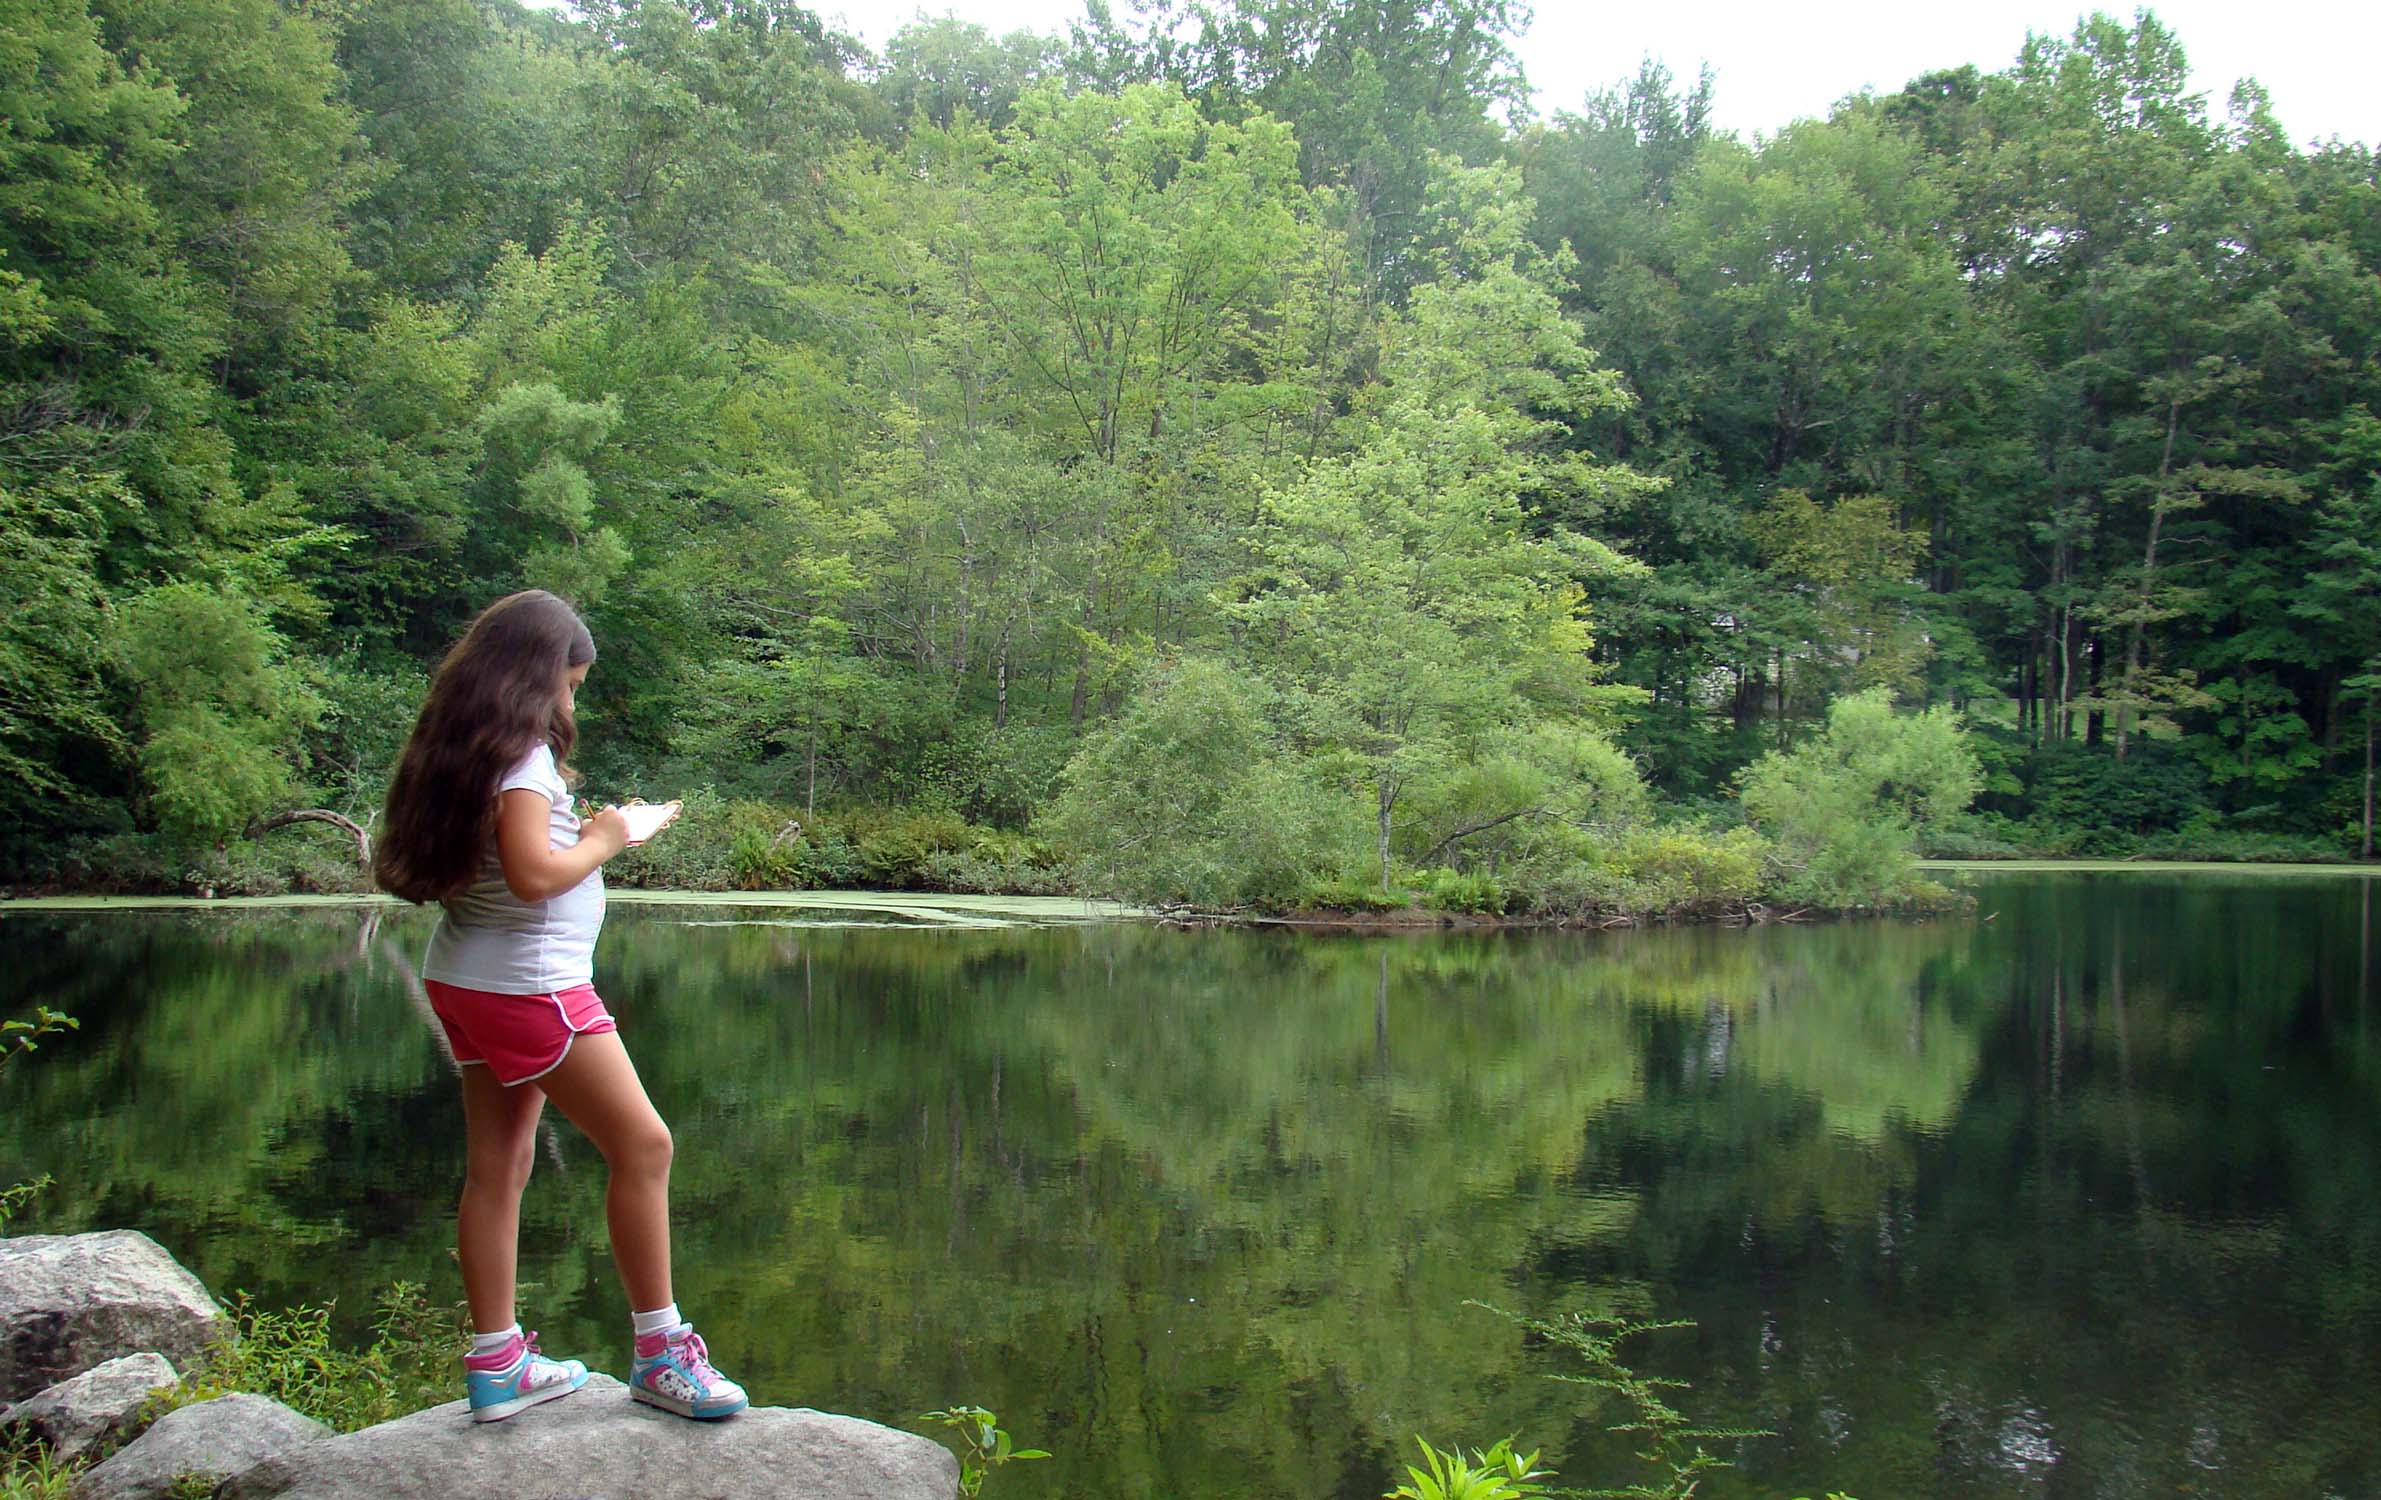 A young visitor enjoys solitude at Weir Pond